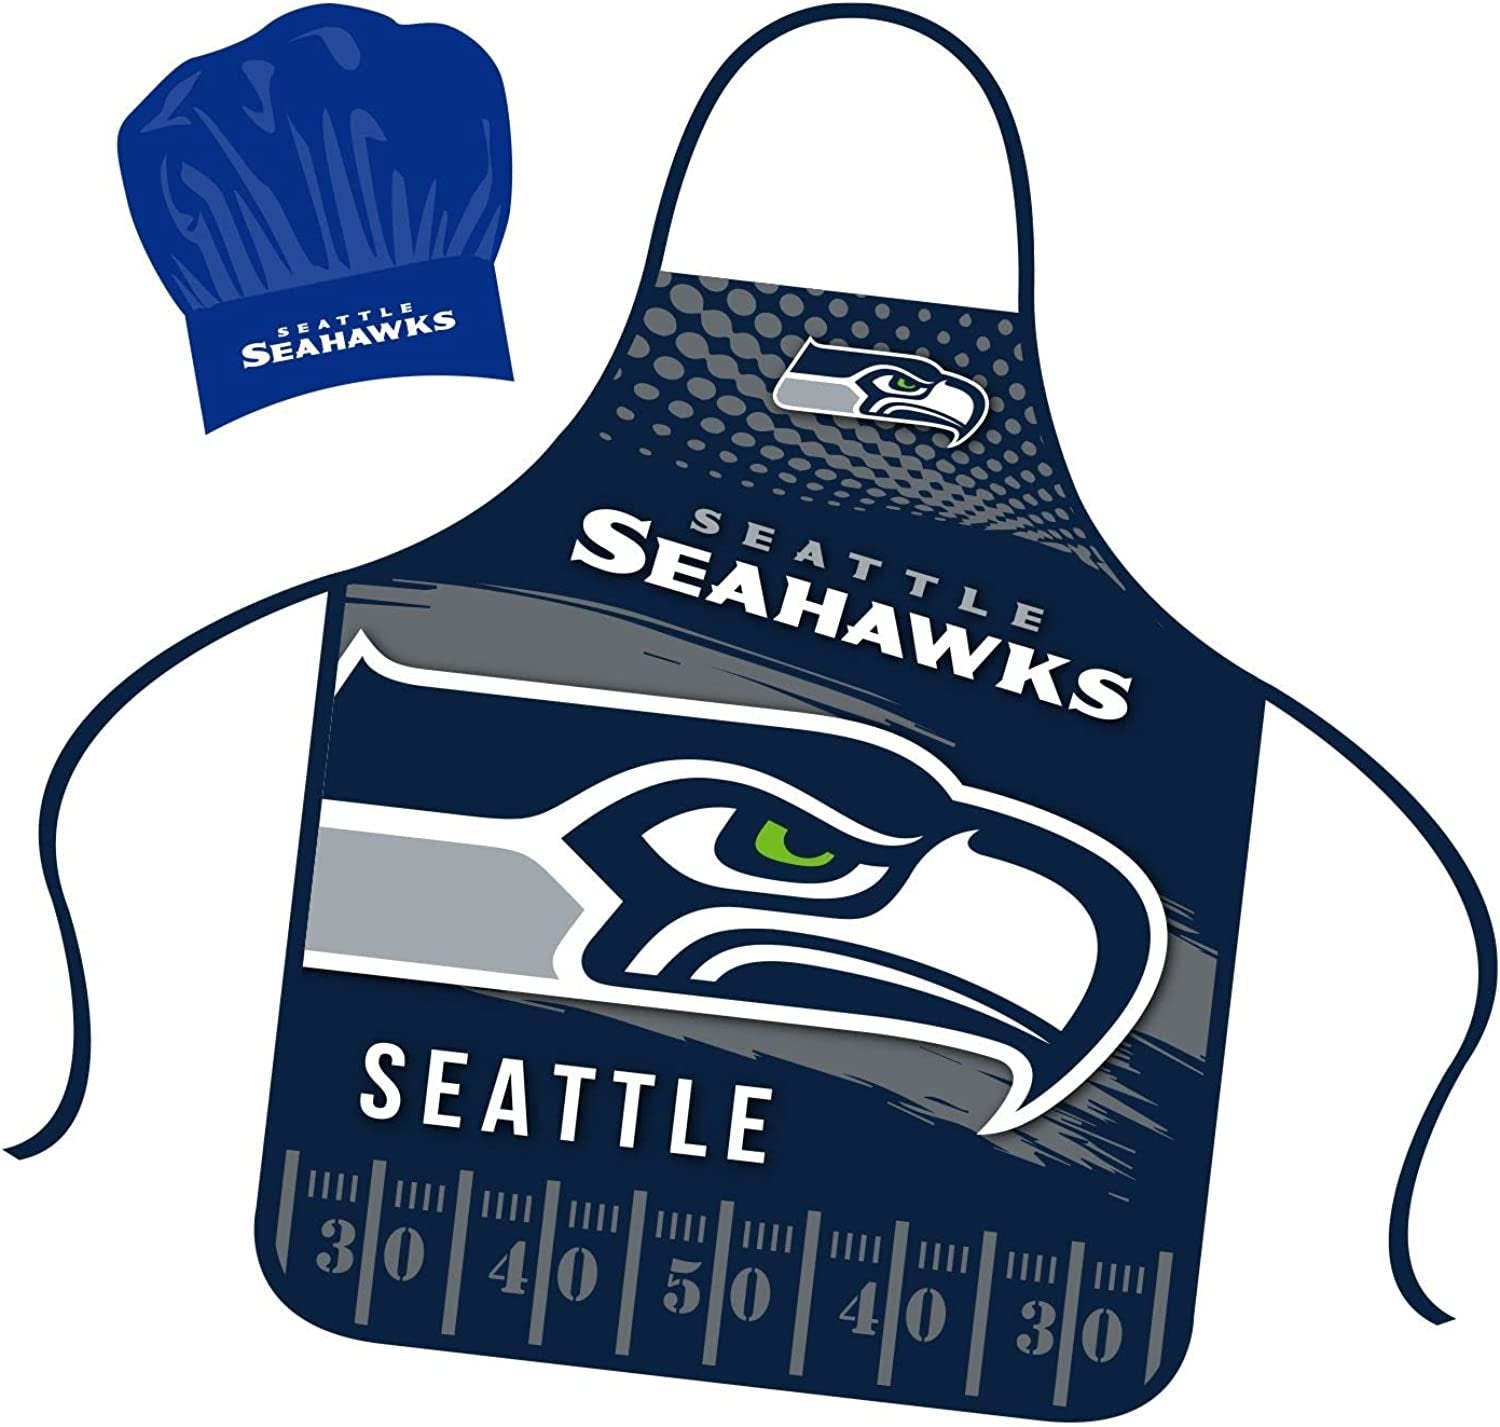 Seattle Seahawks Apron Chef Hat Set Full Color Universal Size Tie Back Grilling Tailgate BBQ Cooking Host